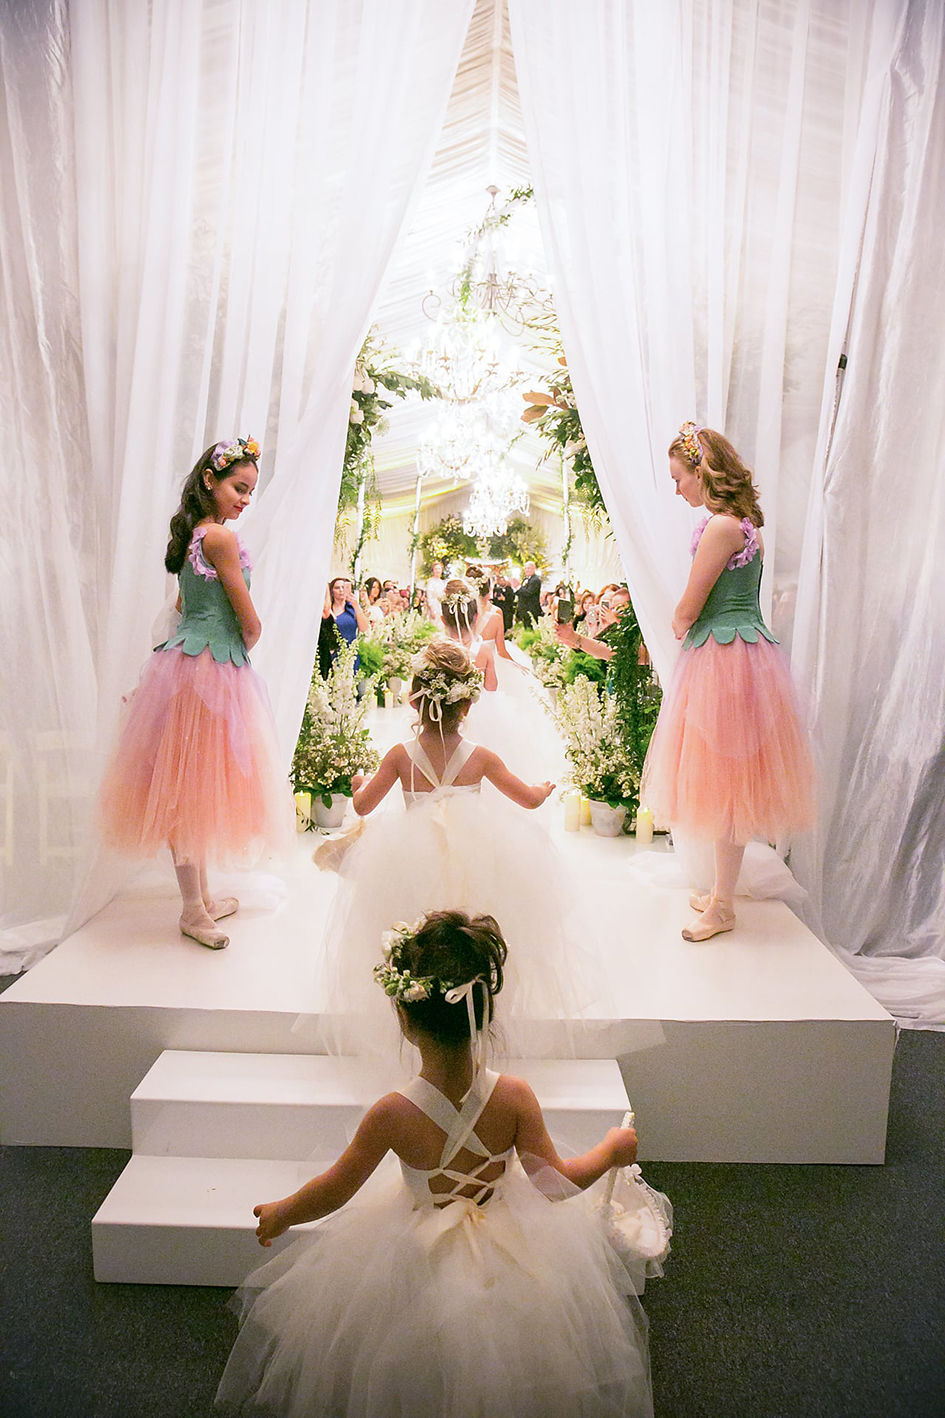 The flower girls walk down the aisle at Michael and Neda's wedding at Four Seasons Westlake Village